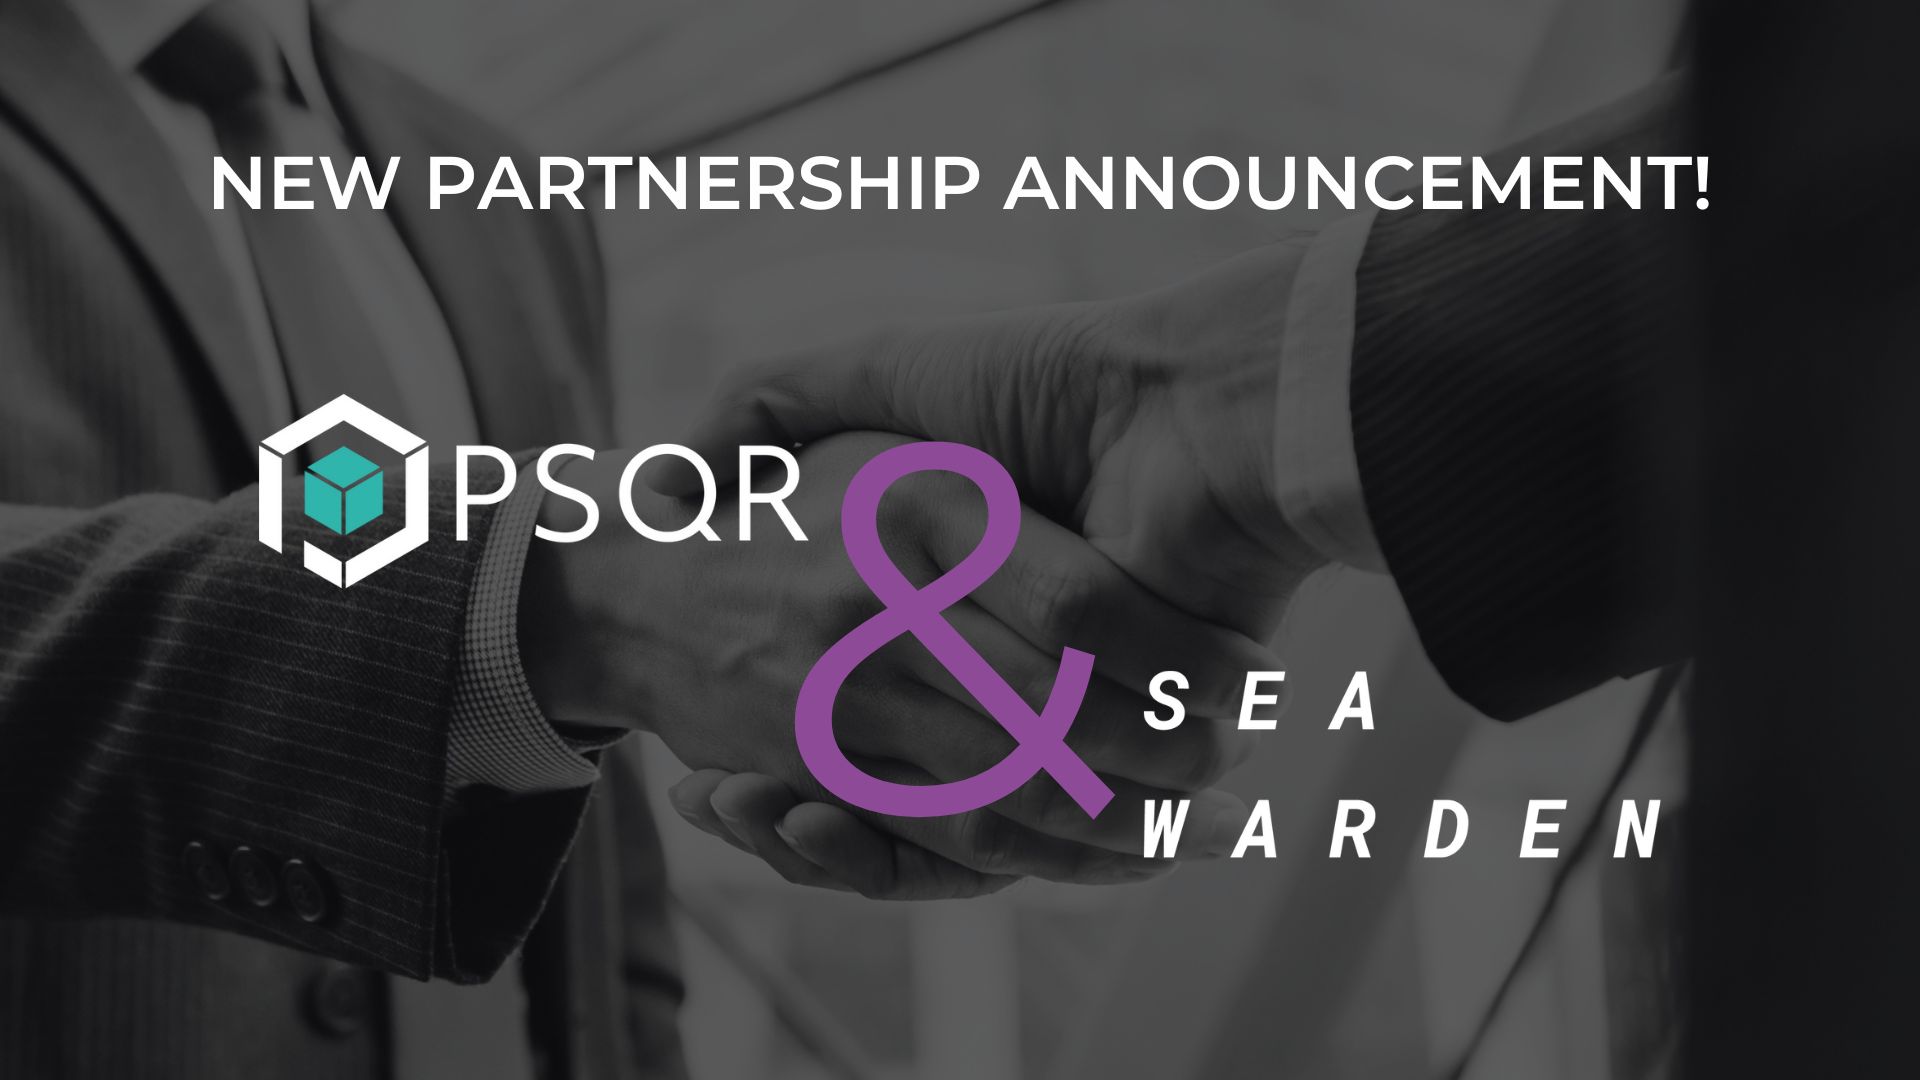 PSQR and Sea Warden Partnership Announcement